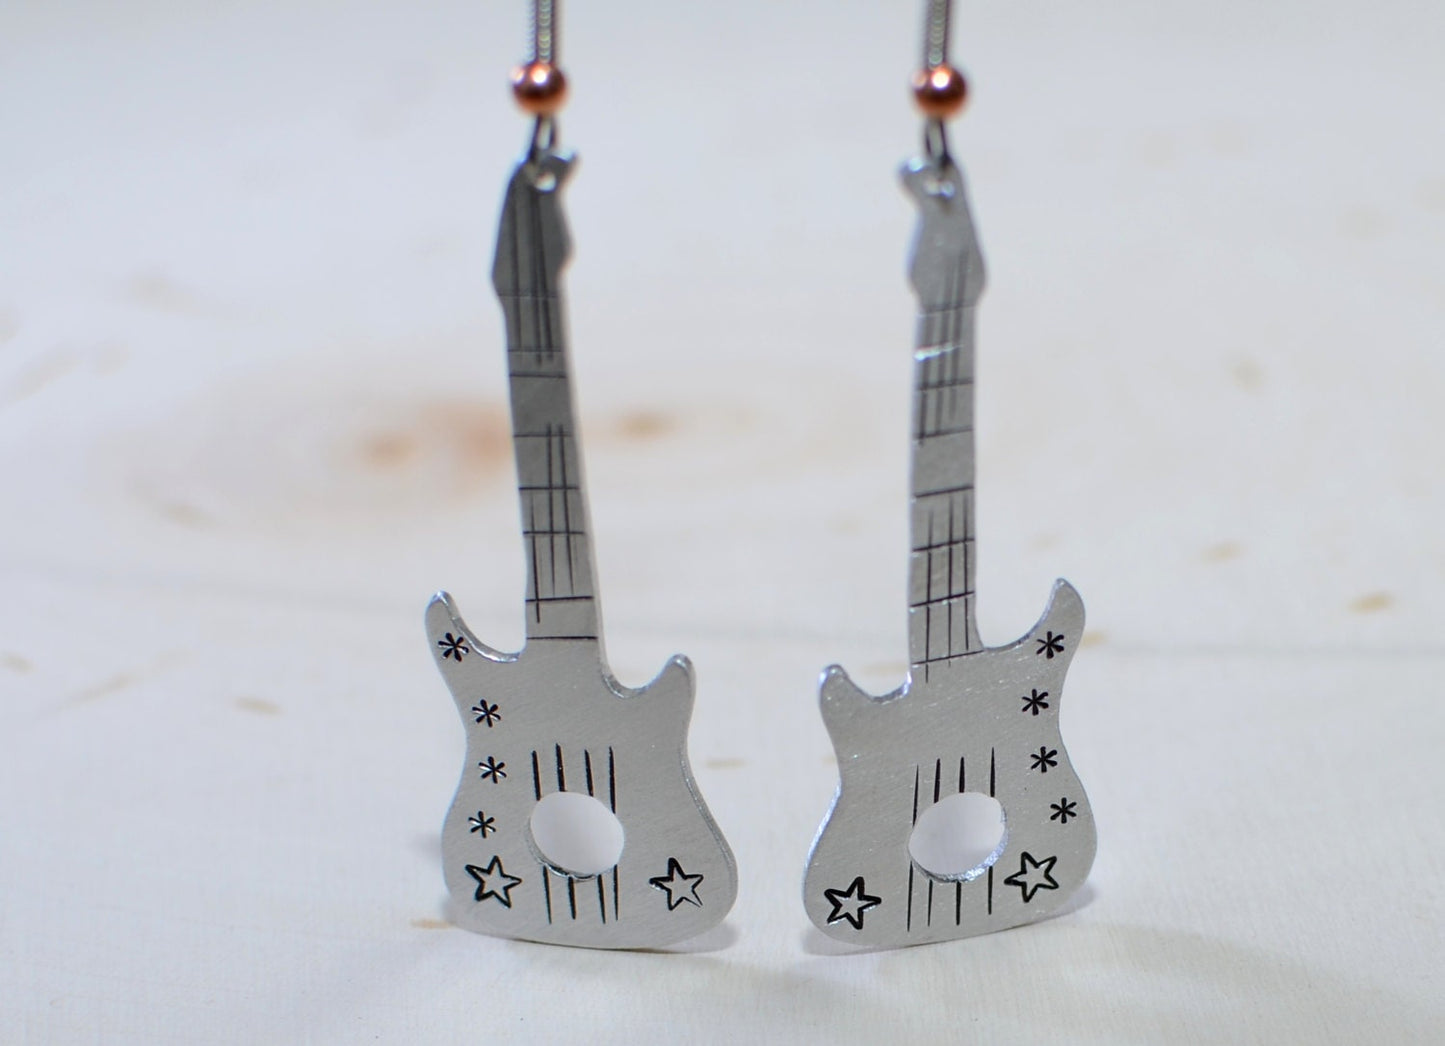 Guitar shaped handcrafted dangle earrings in your choice of aluminum or sterling silver